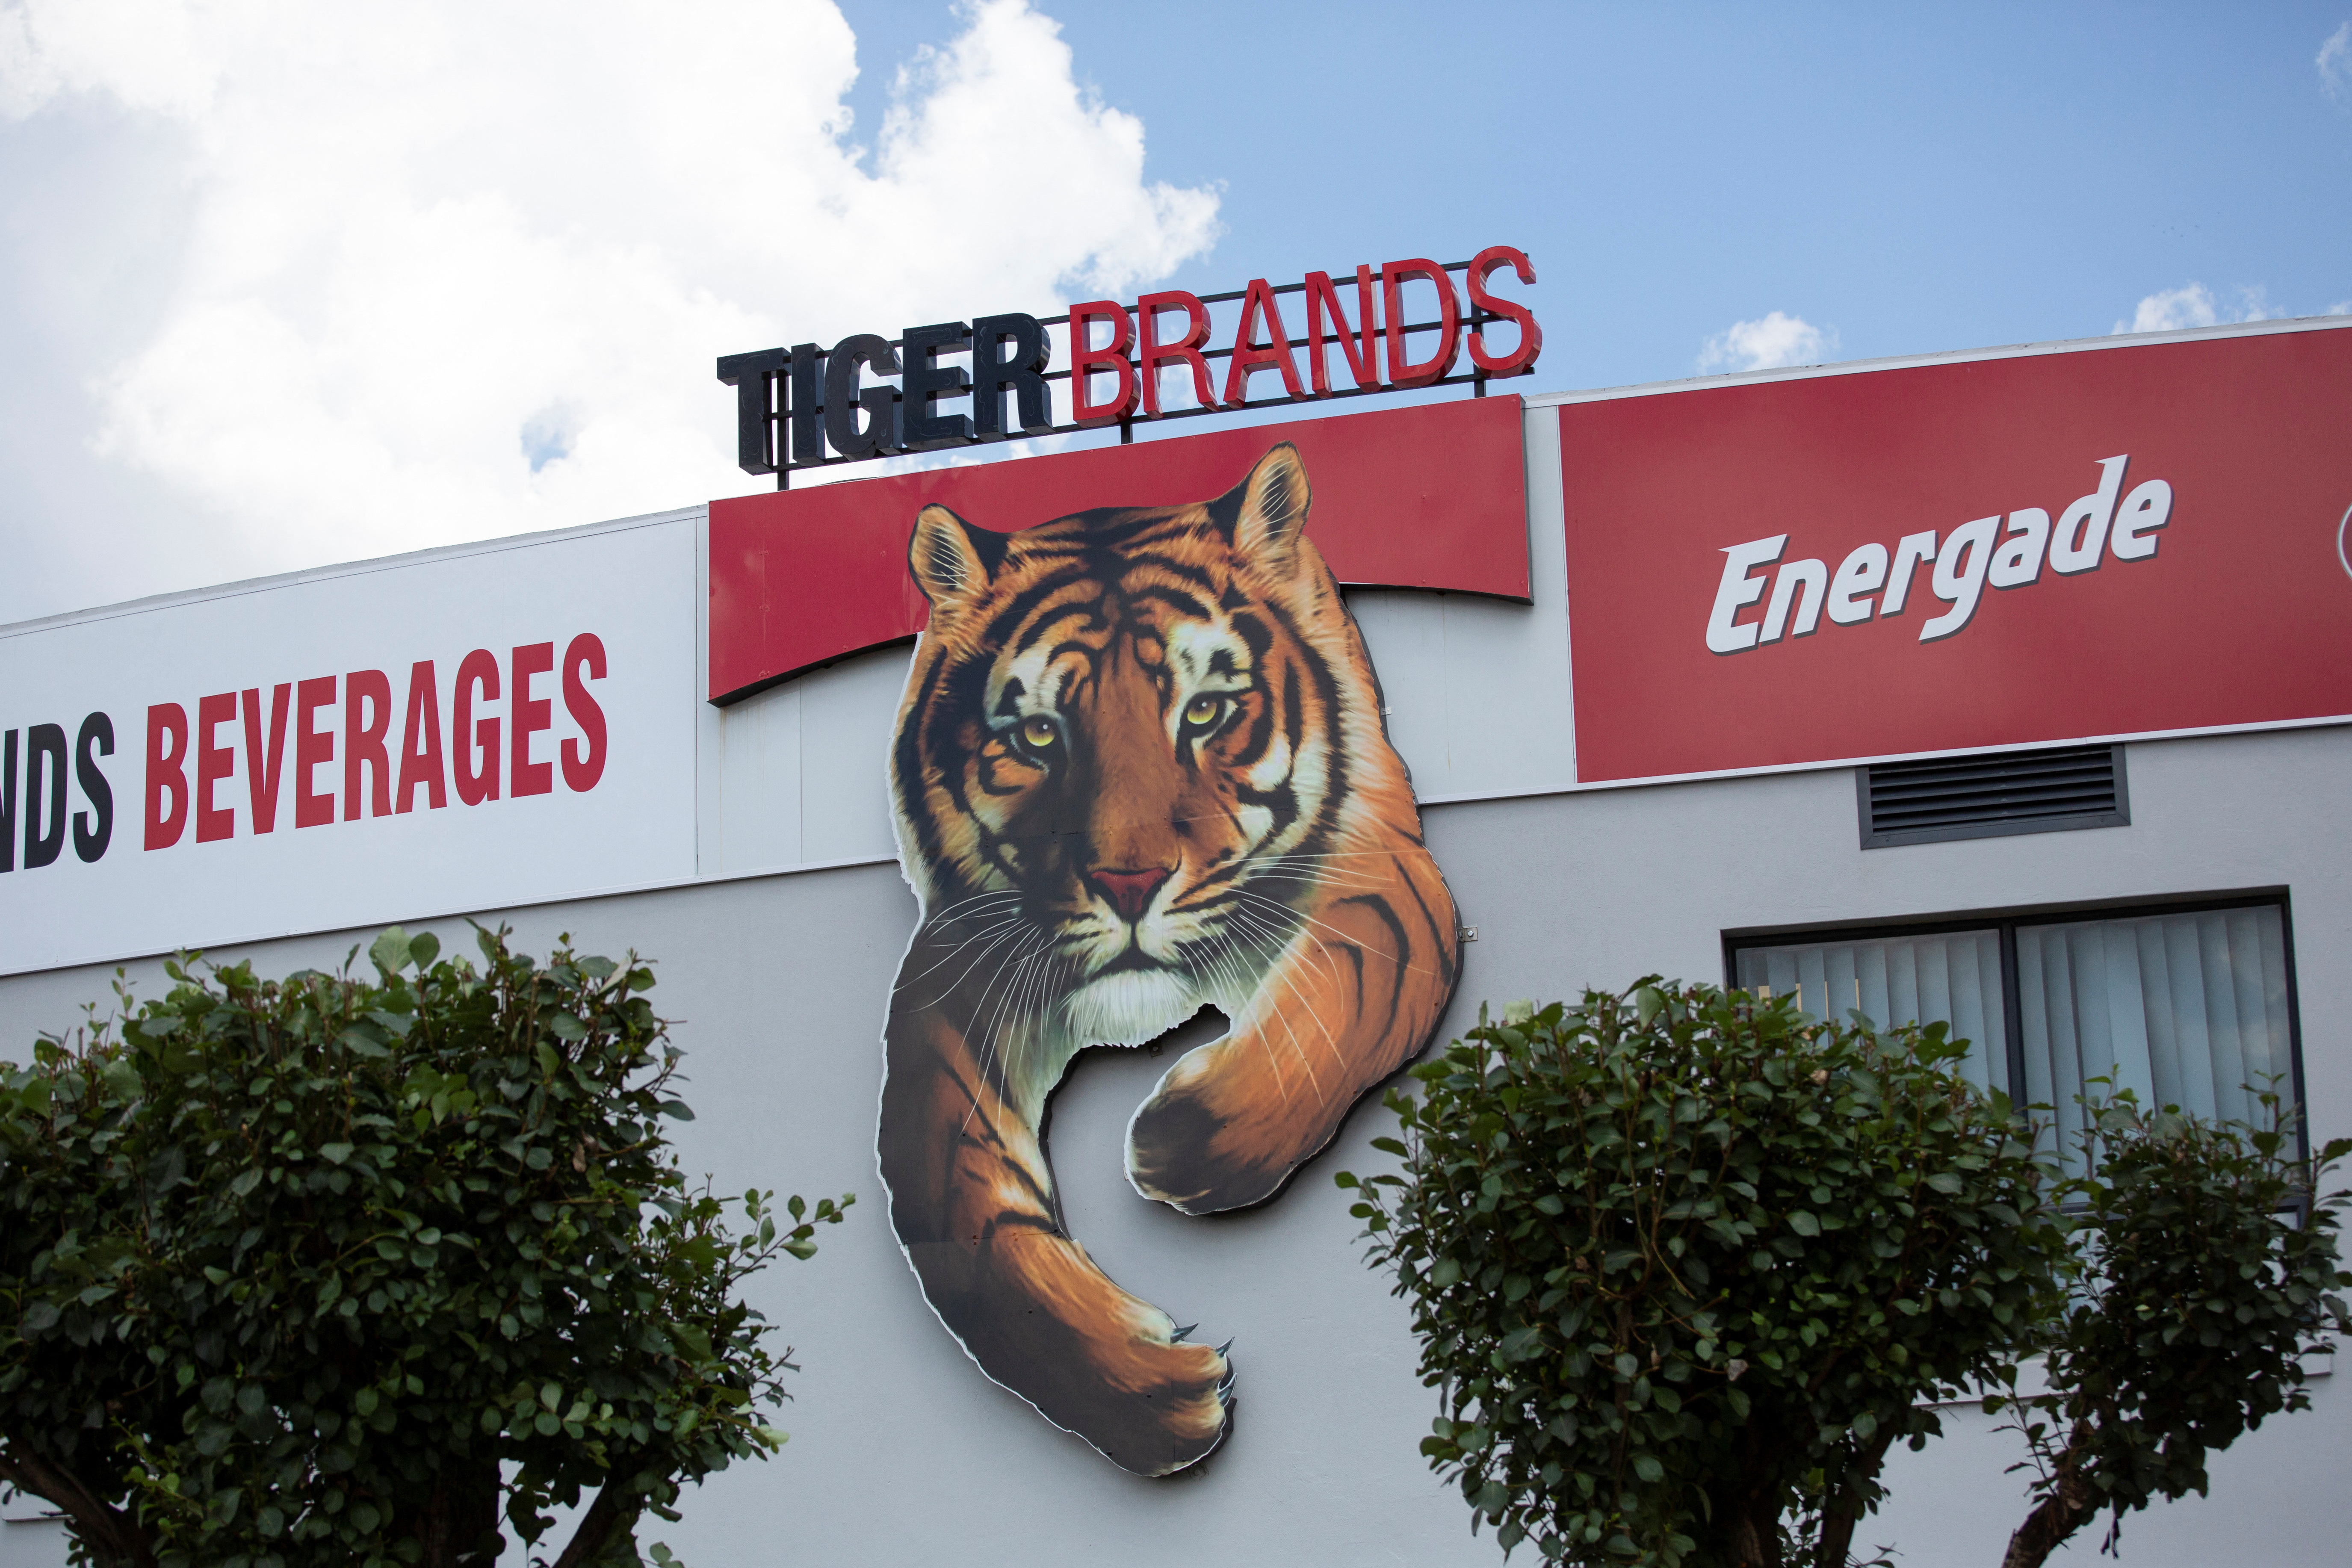 Tiger Brands beverage manufacturing plant in South Africa